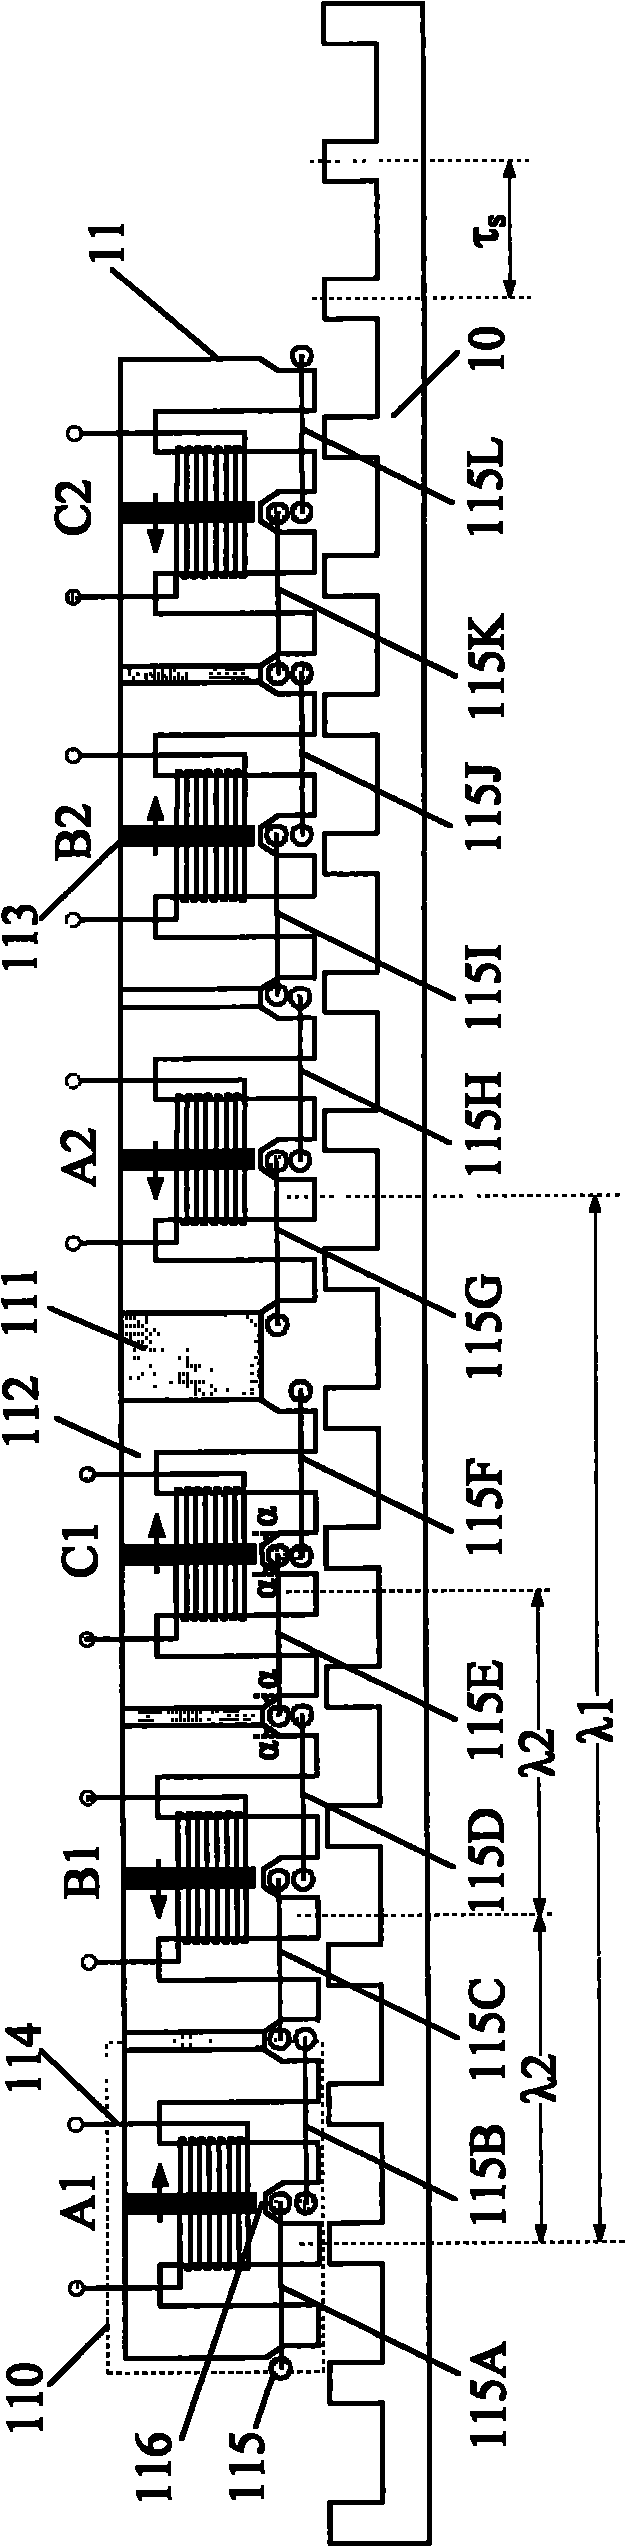 Complementary modular hybrid excited linear motor